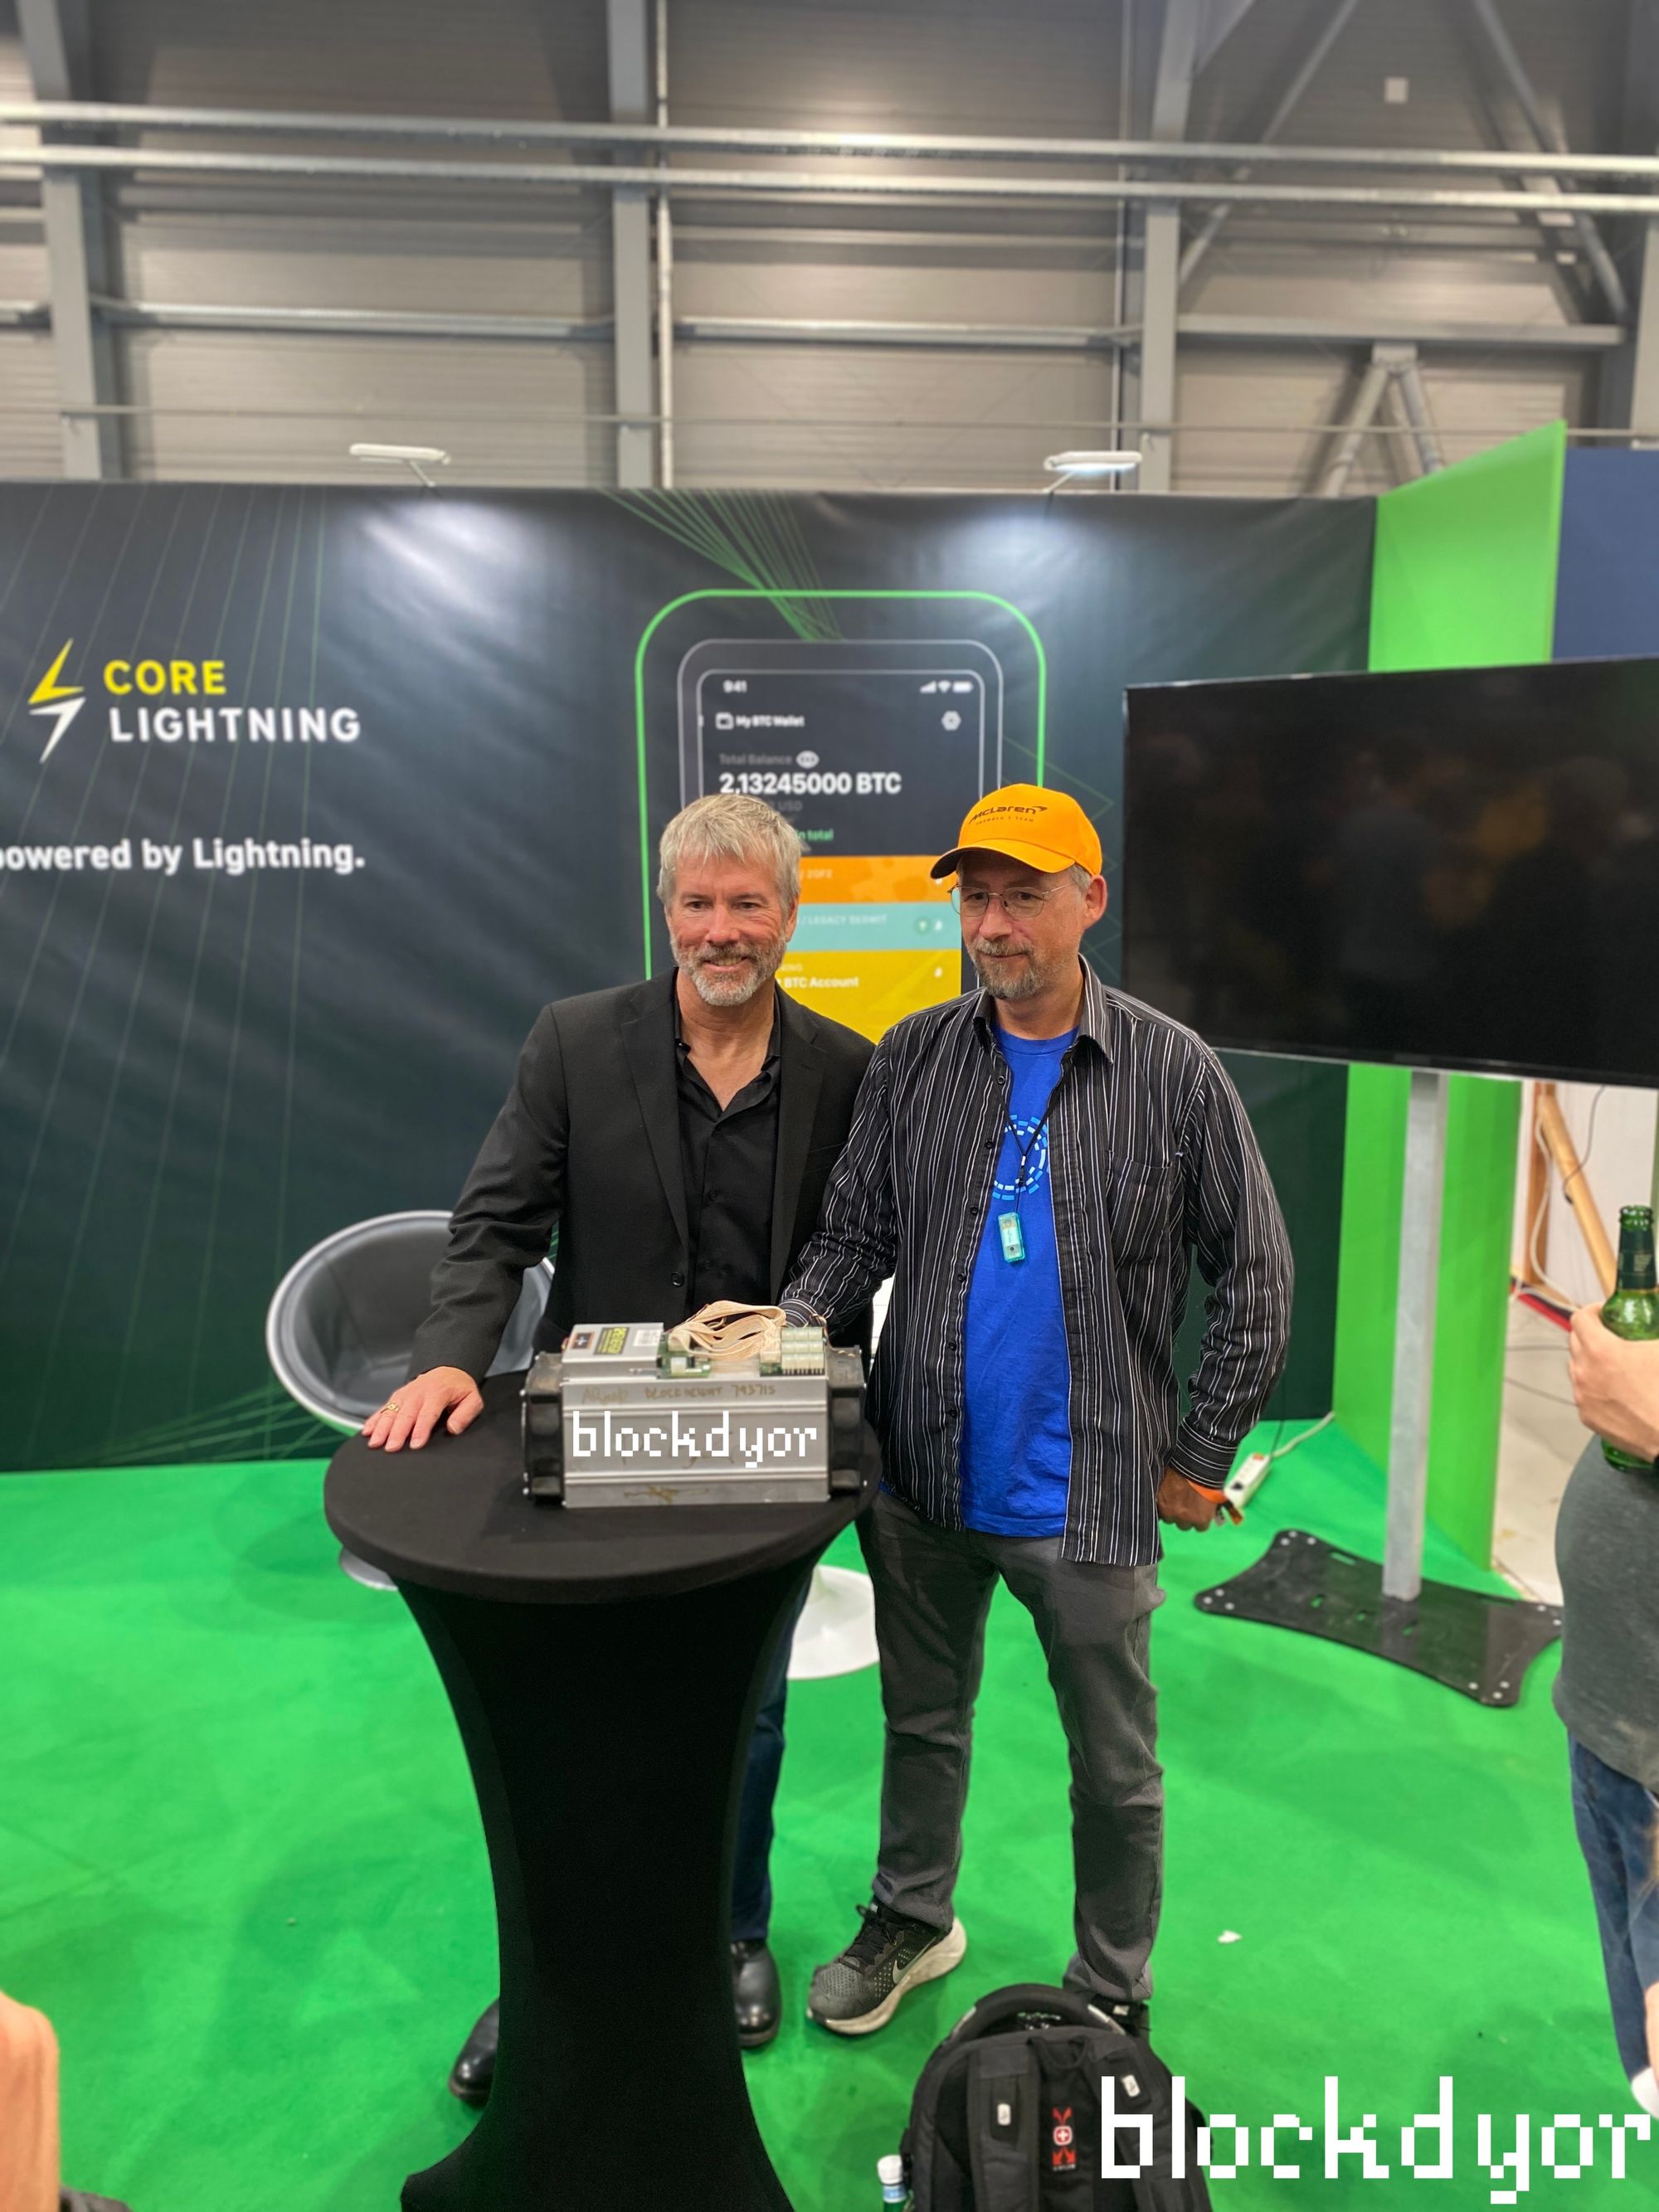 Michael Saylor and Adam Back in front of an Antminer at the Blockstream booth at BTC Prague